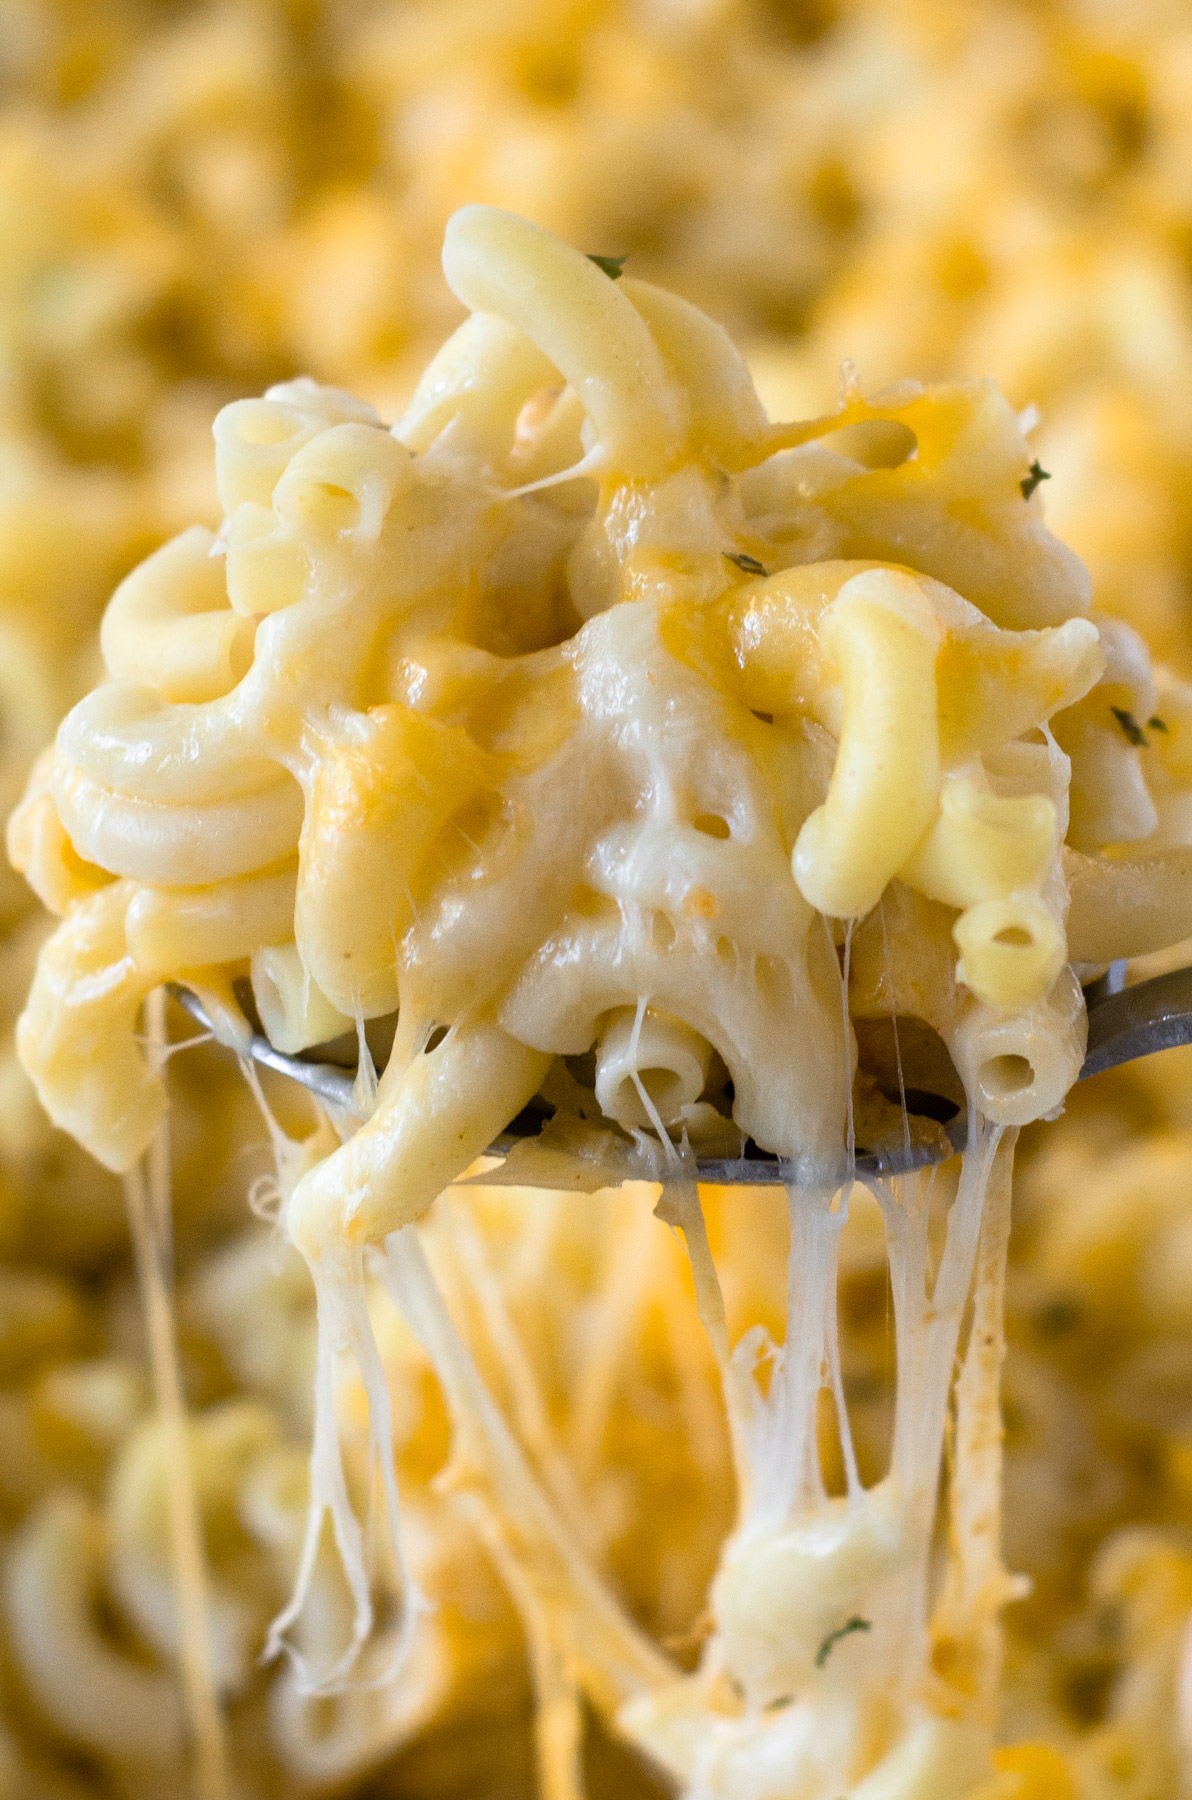 mac and cheese being pulled from casserole with cheesy strings on spoon